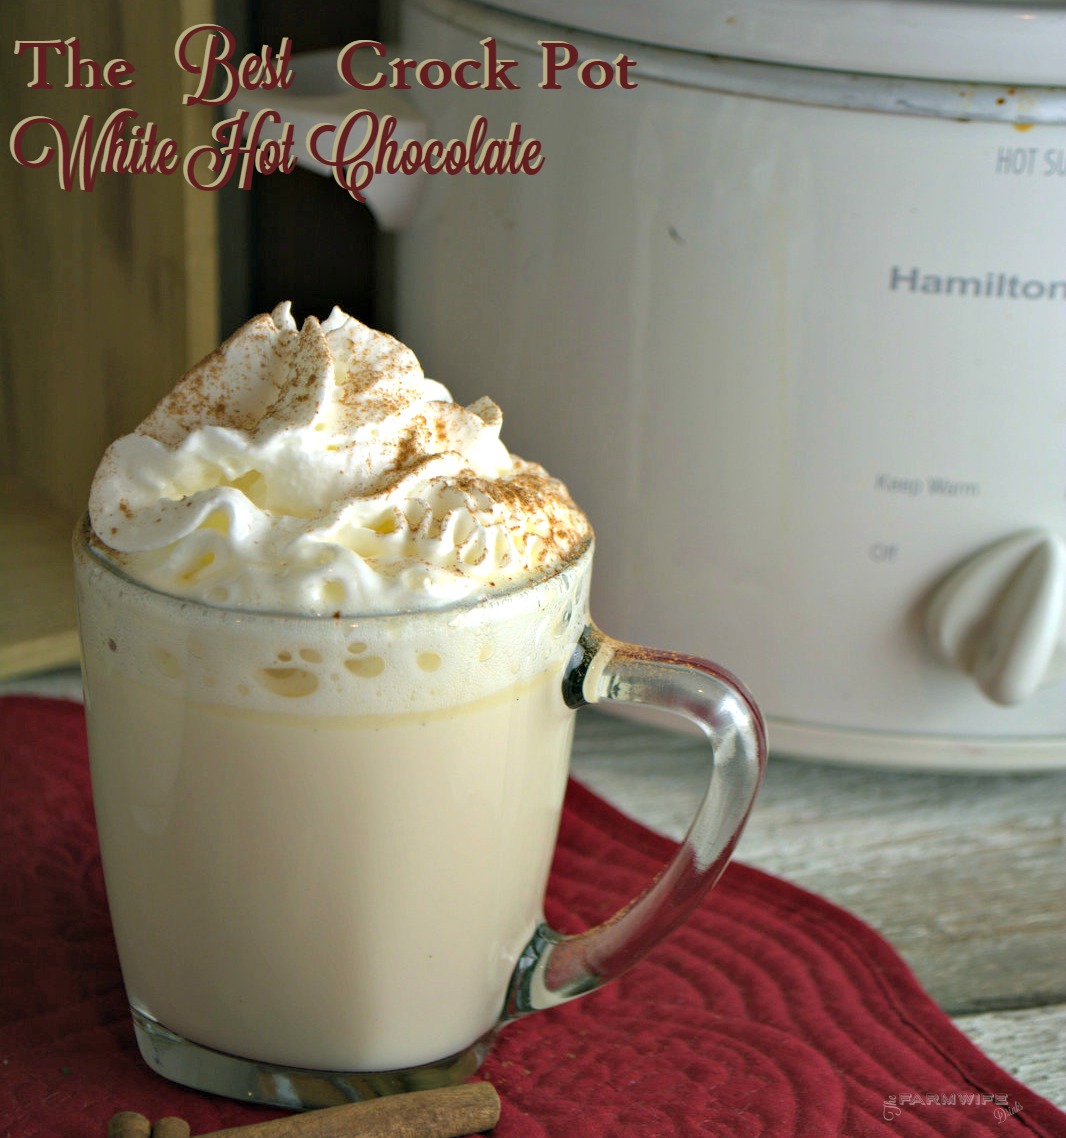 Crock Pot White Hot Chocolate recipe is one of the most decadent drink recipes I have ever experienced. It was rich and luscious to drink. Great for warming up on chilly winter nights.